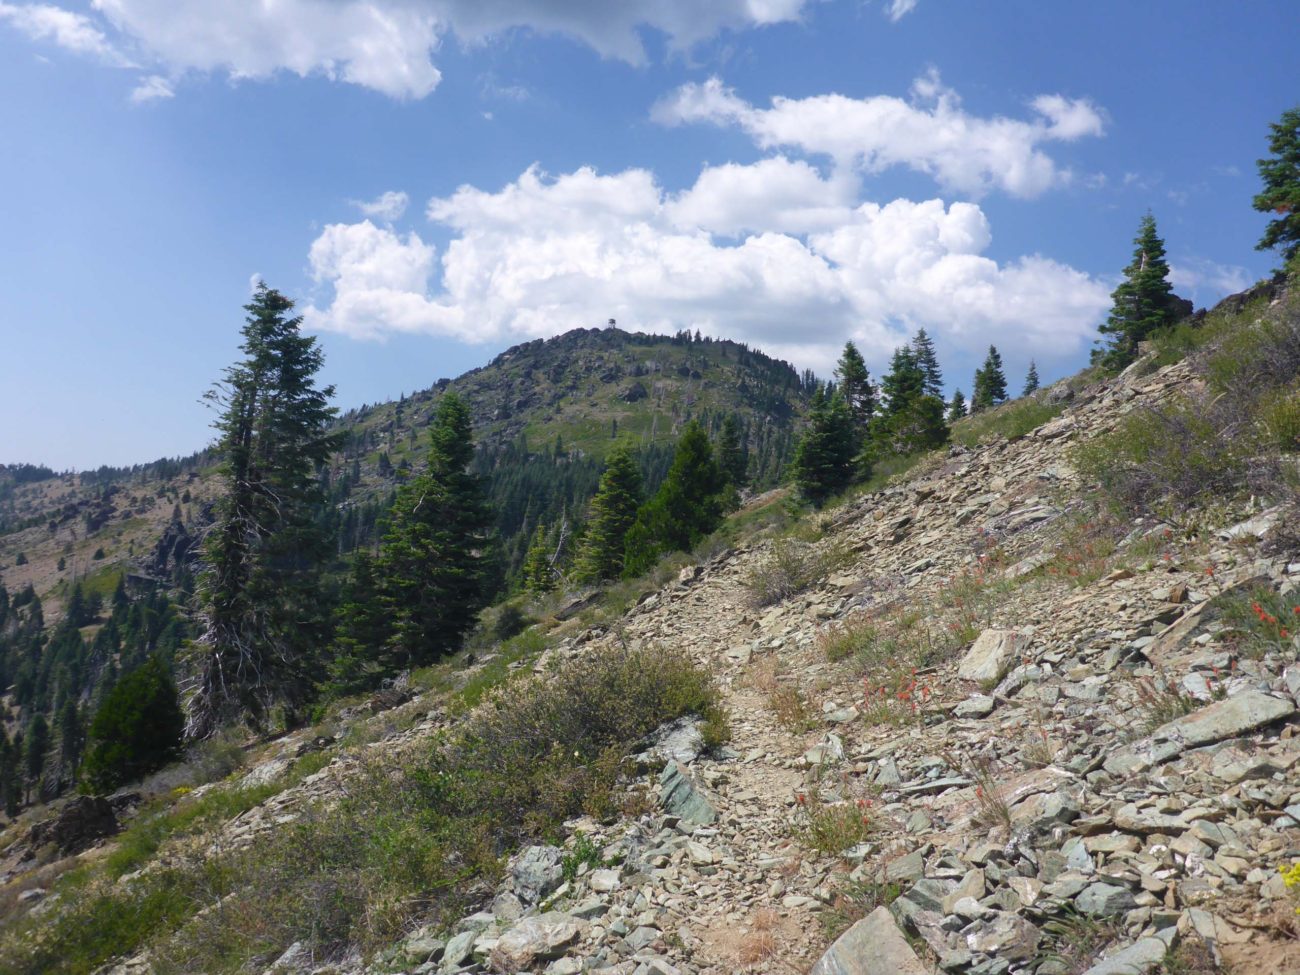 Black Rock Trail and mountain, with lookout just visible. D. Burk.